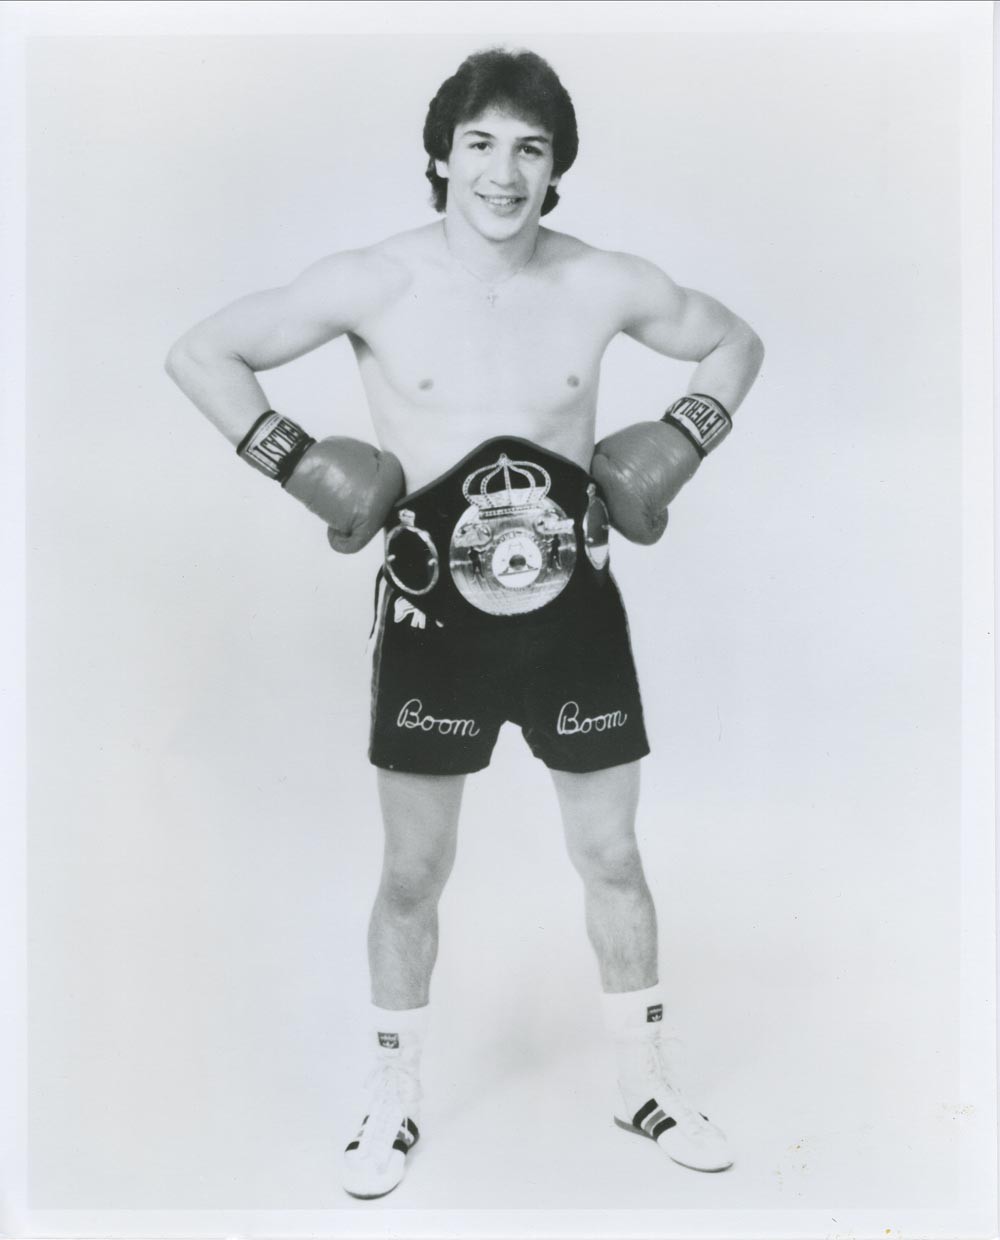 The Good Son: The Life of Ray Boom Boom Mancini' Review